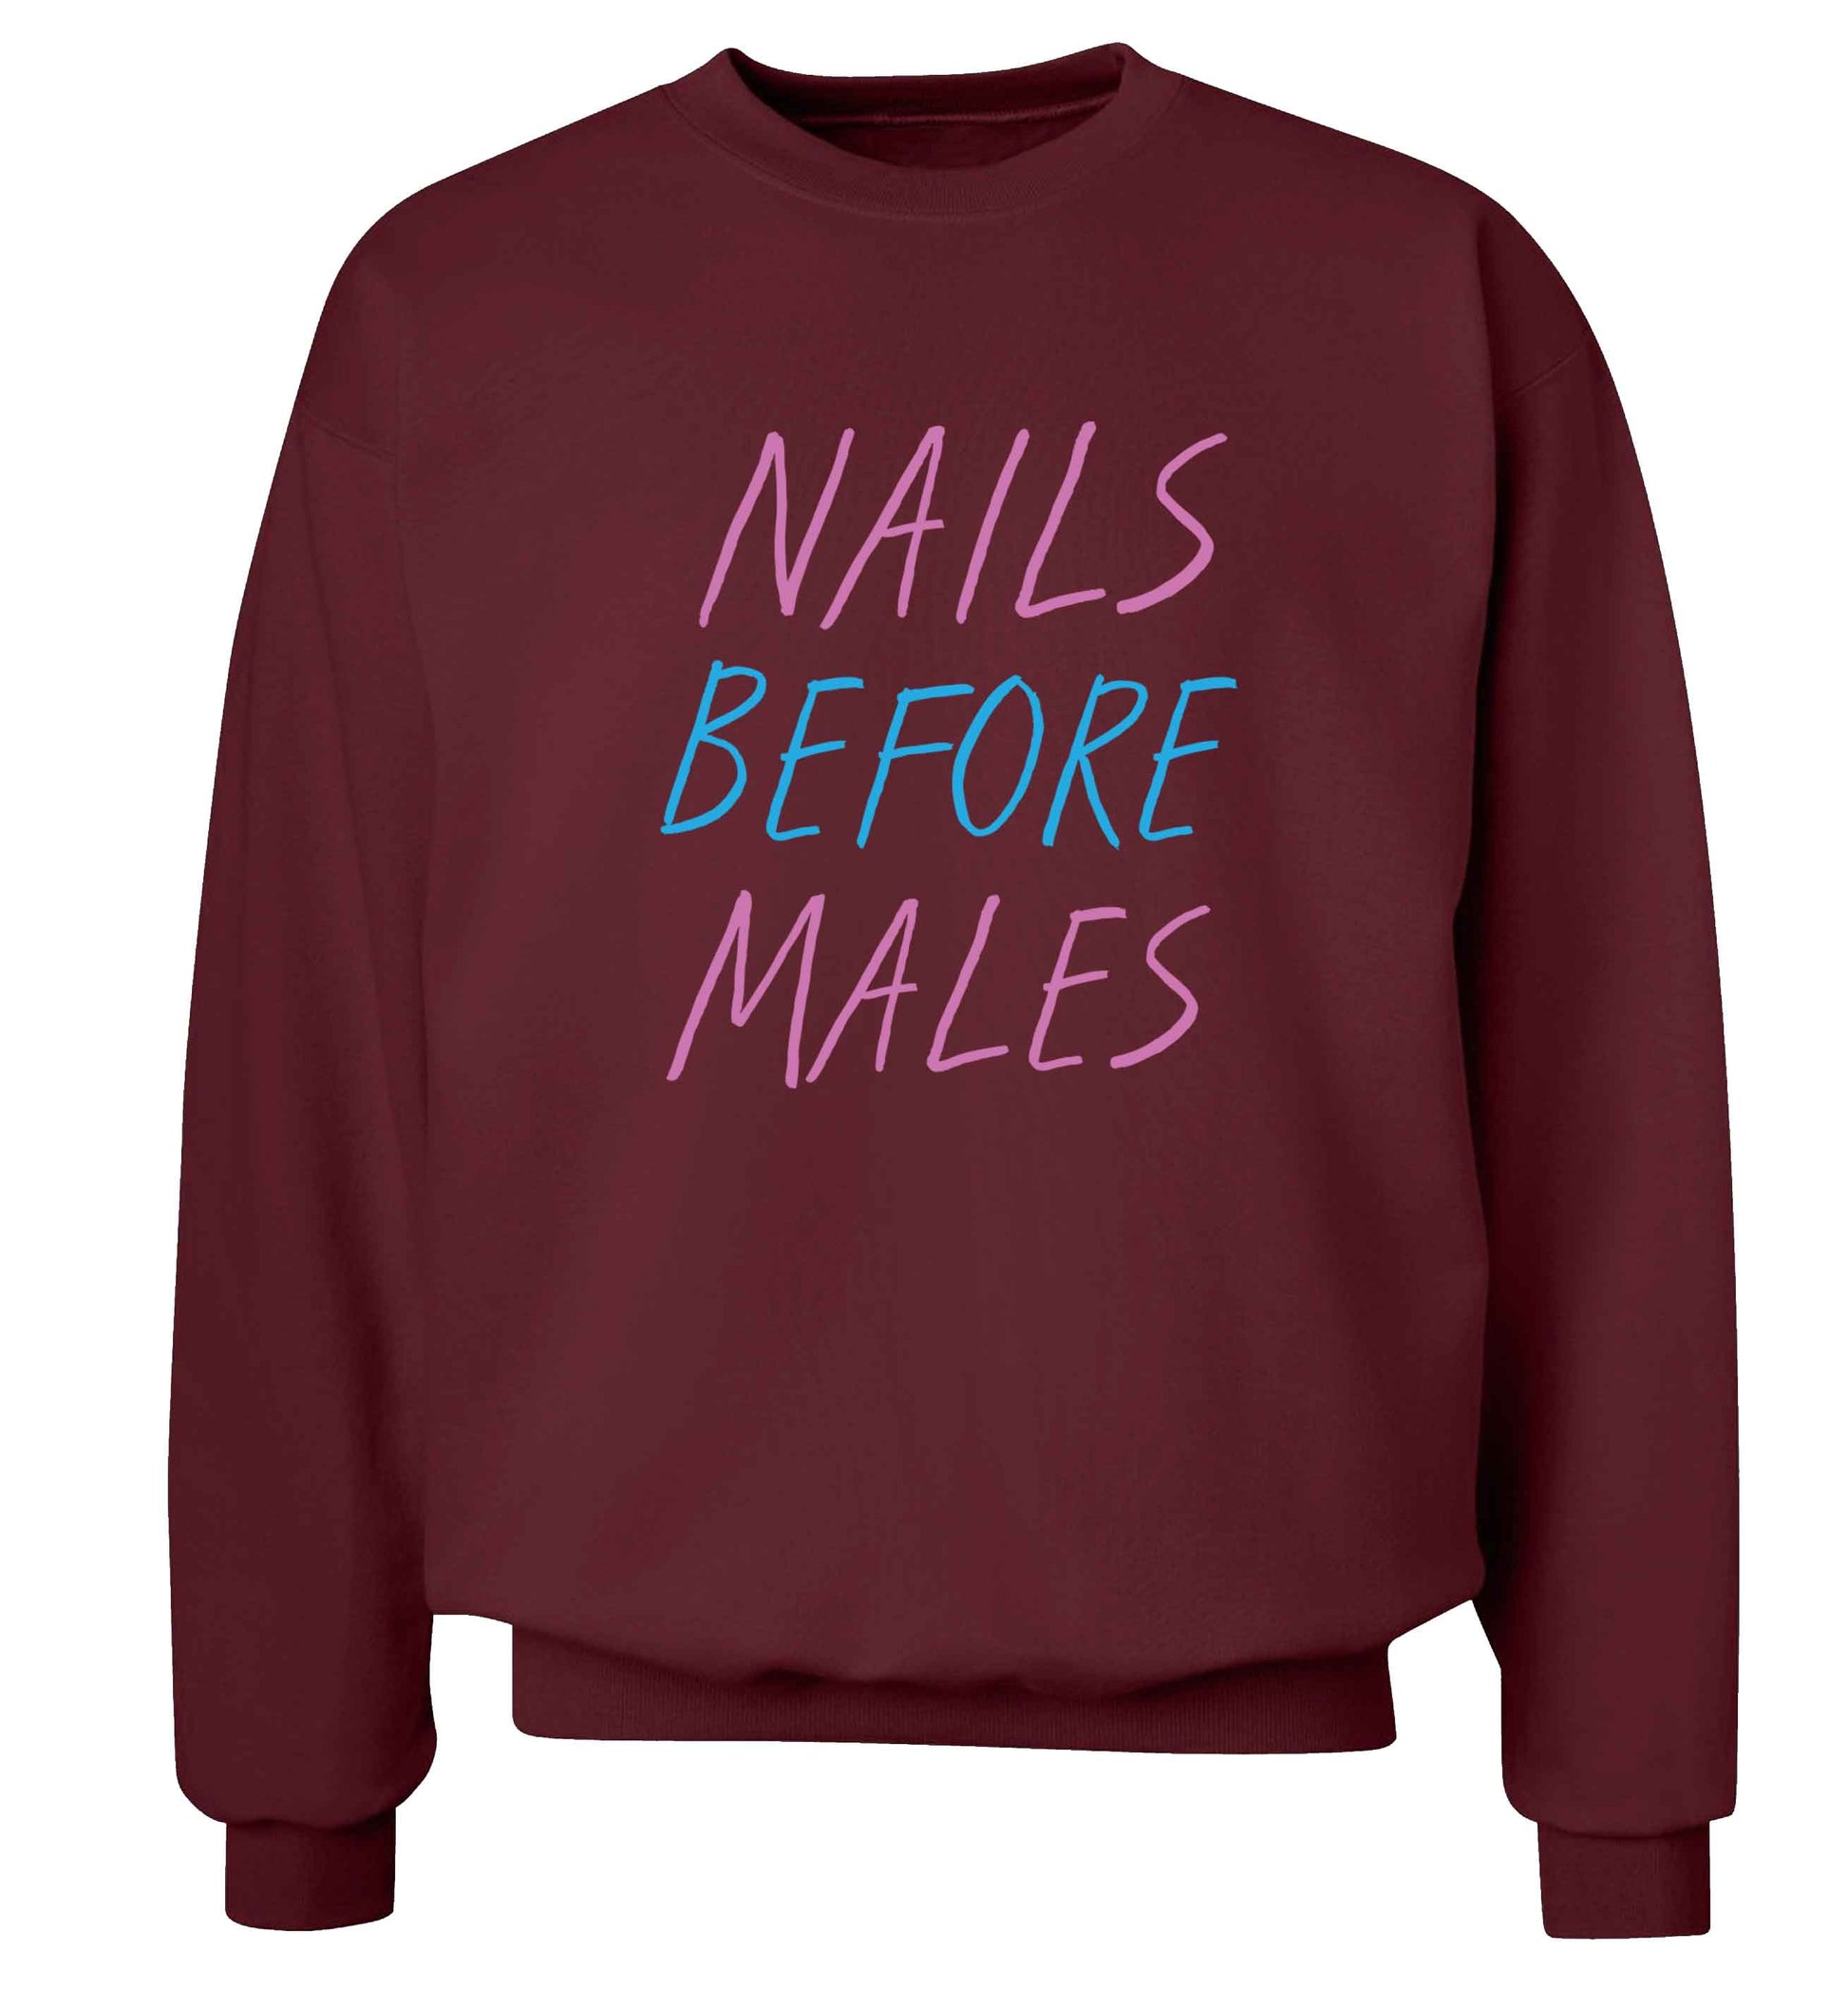 Nails before males adult's unisex maroon sweater 2XL